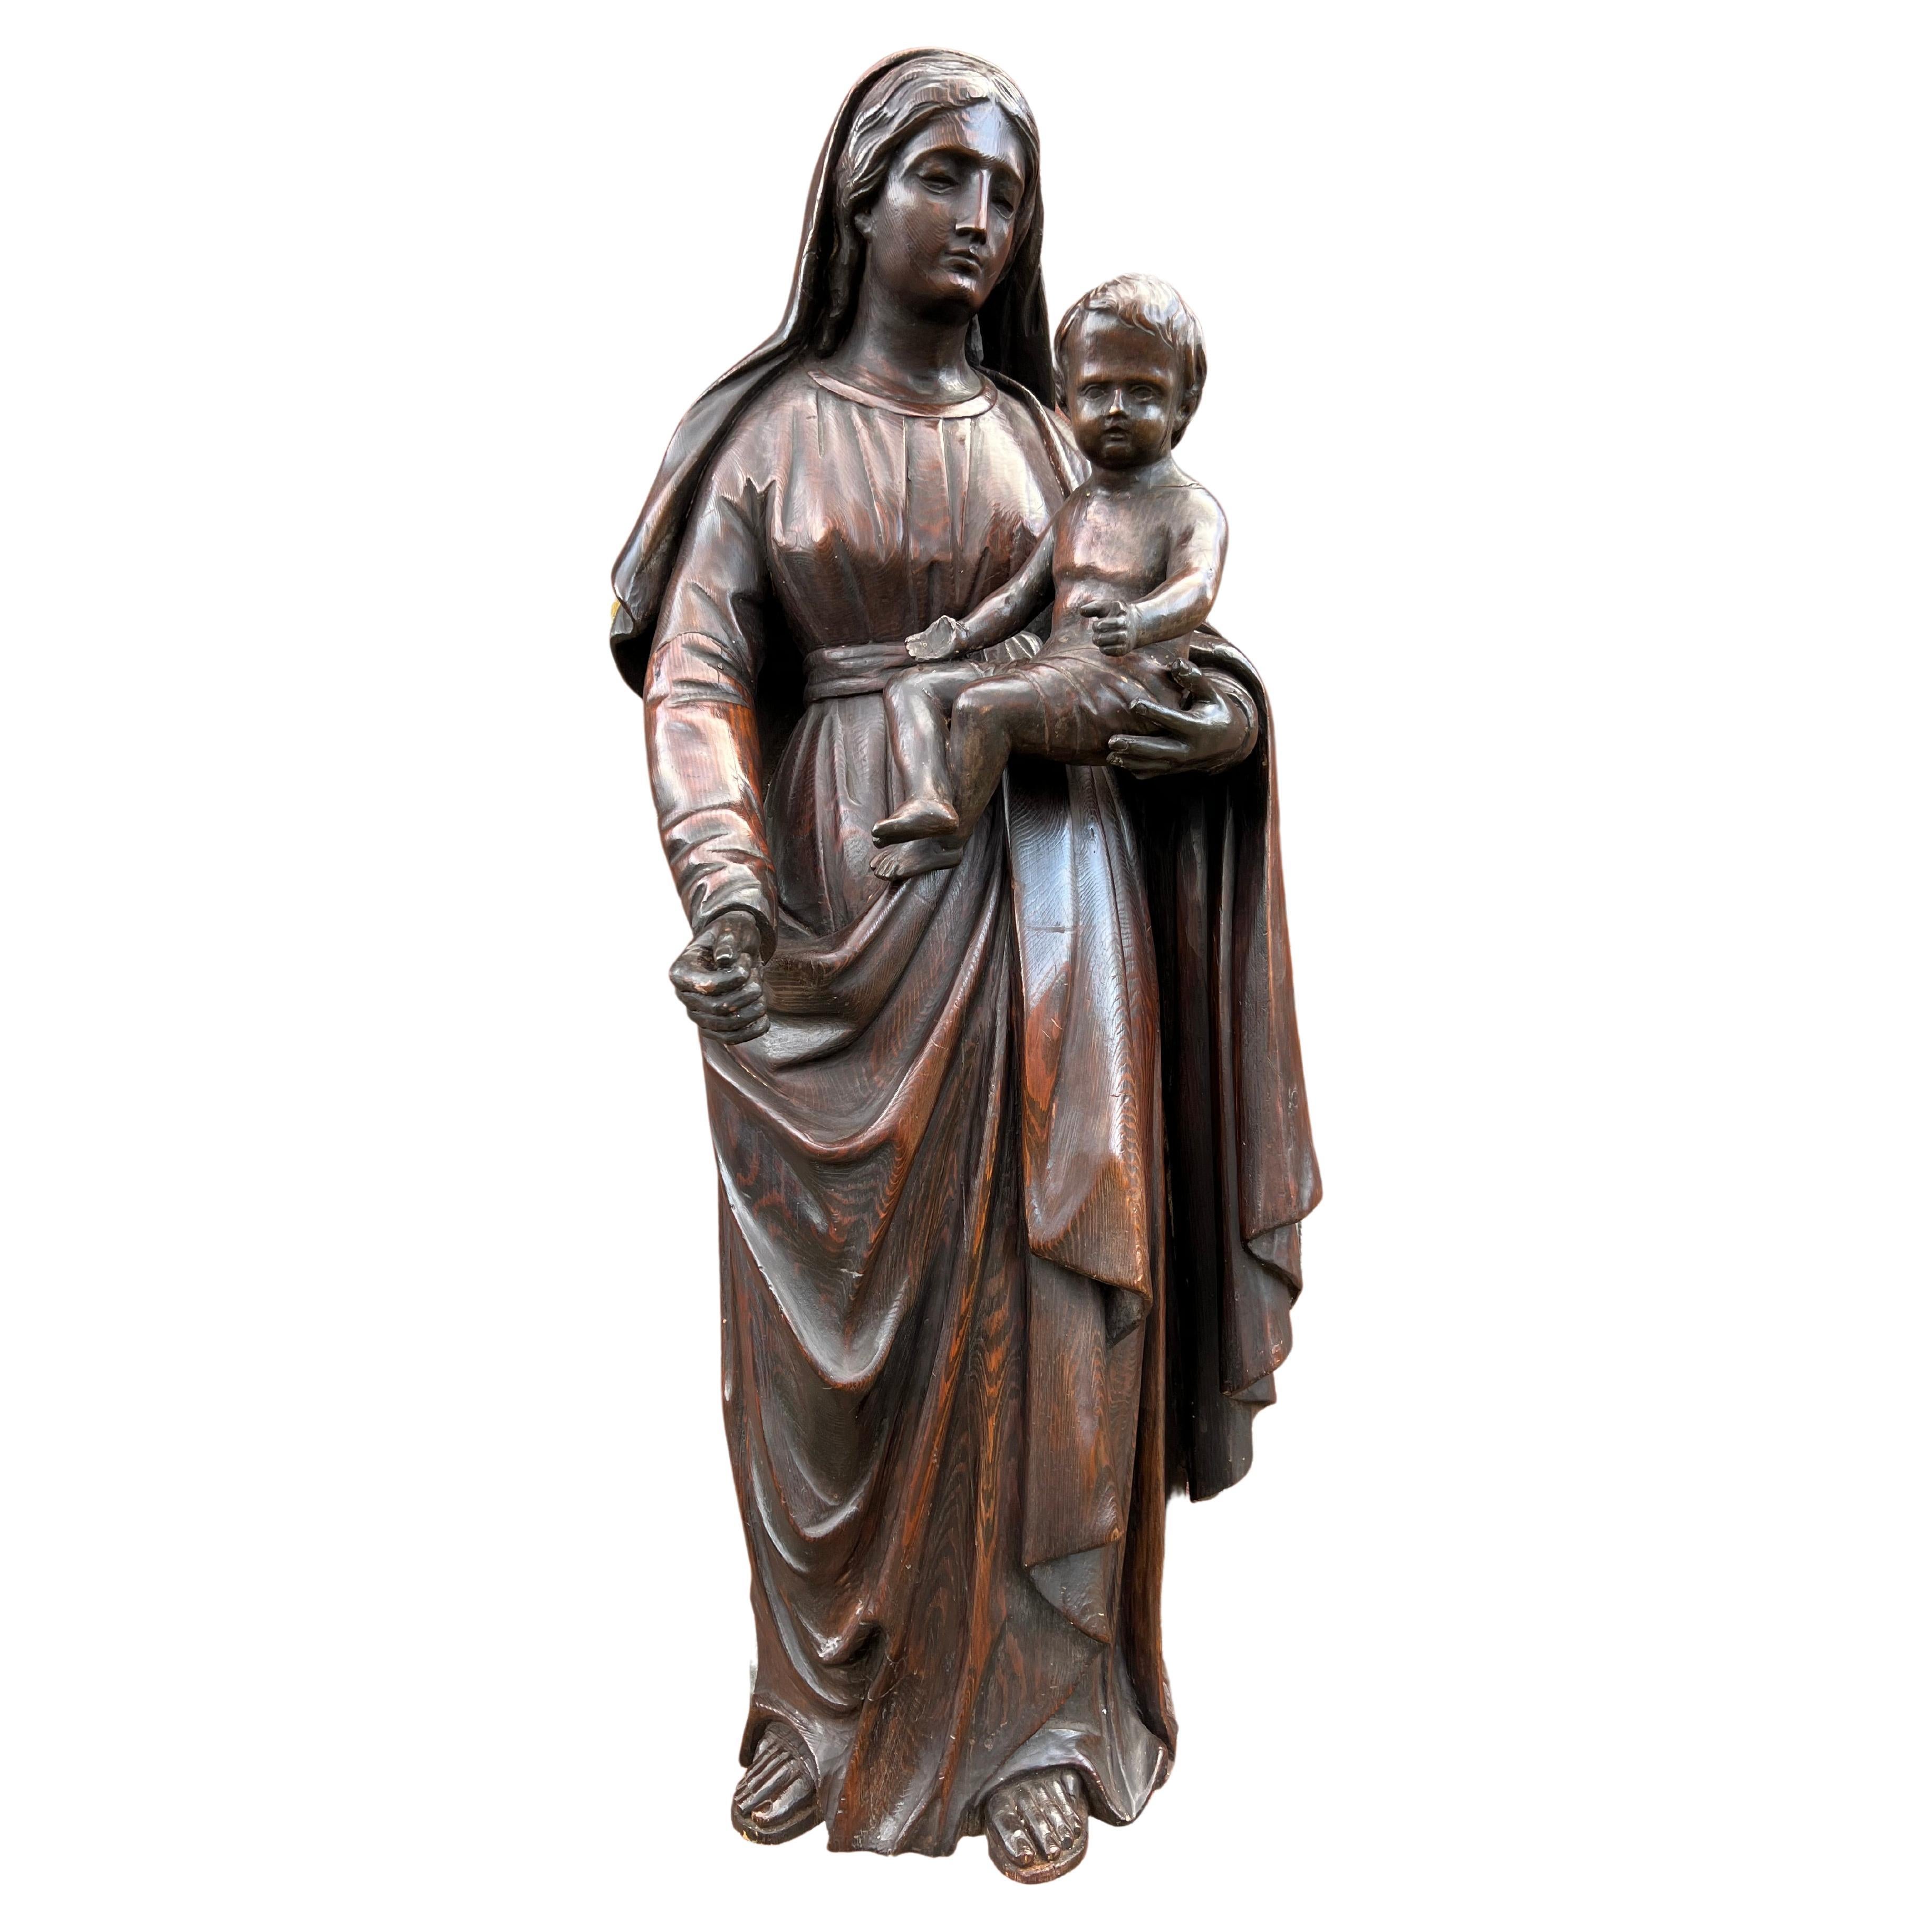 Antique Museum Quality Carved Oak Church Statue of Mother Mary & Child Jesus